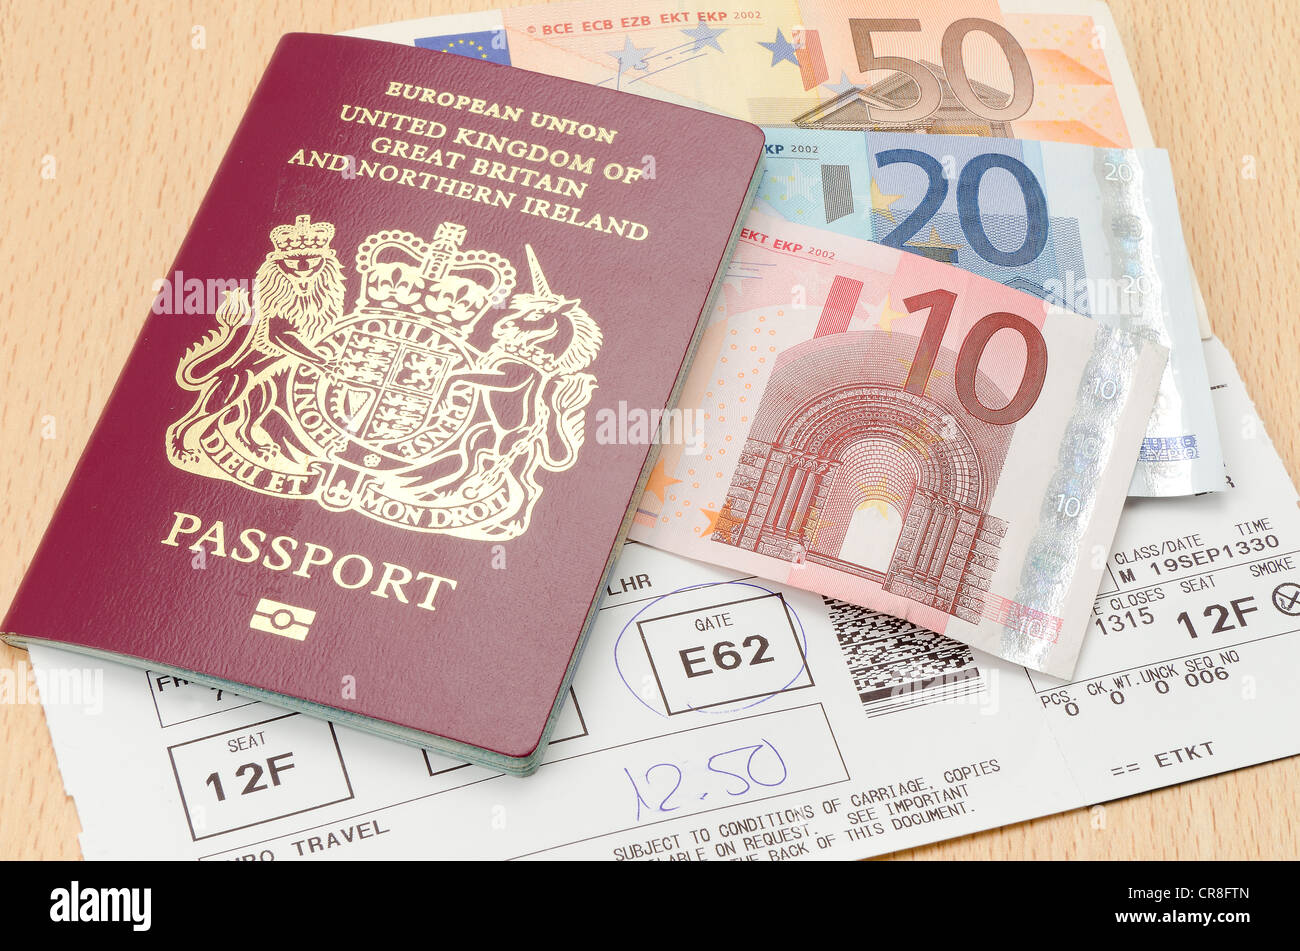 UK passport with Euro currency notes and an airline boarding card - studio shot Stock Photo